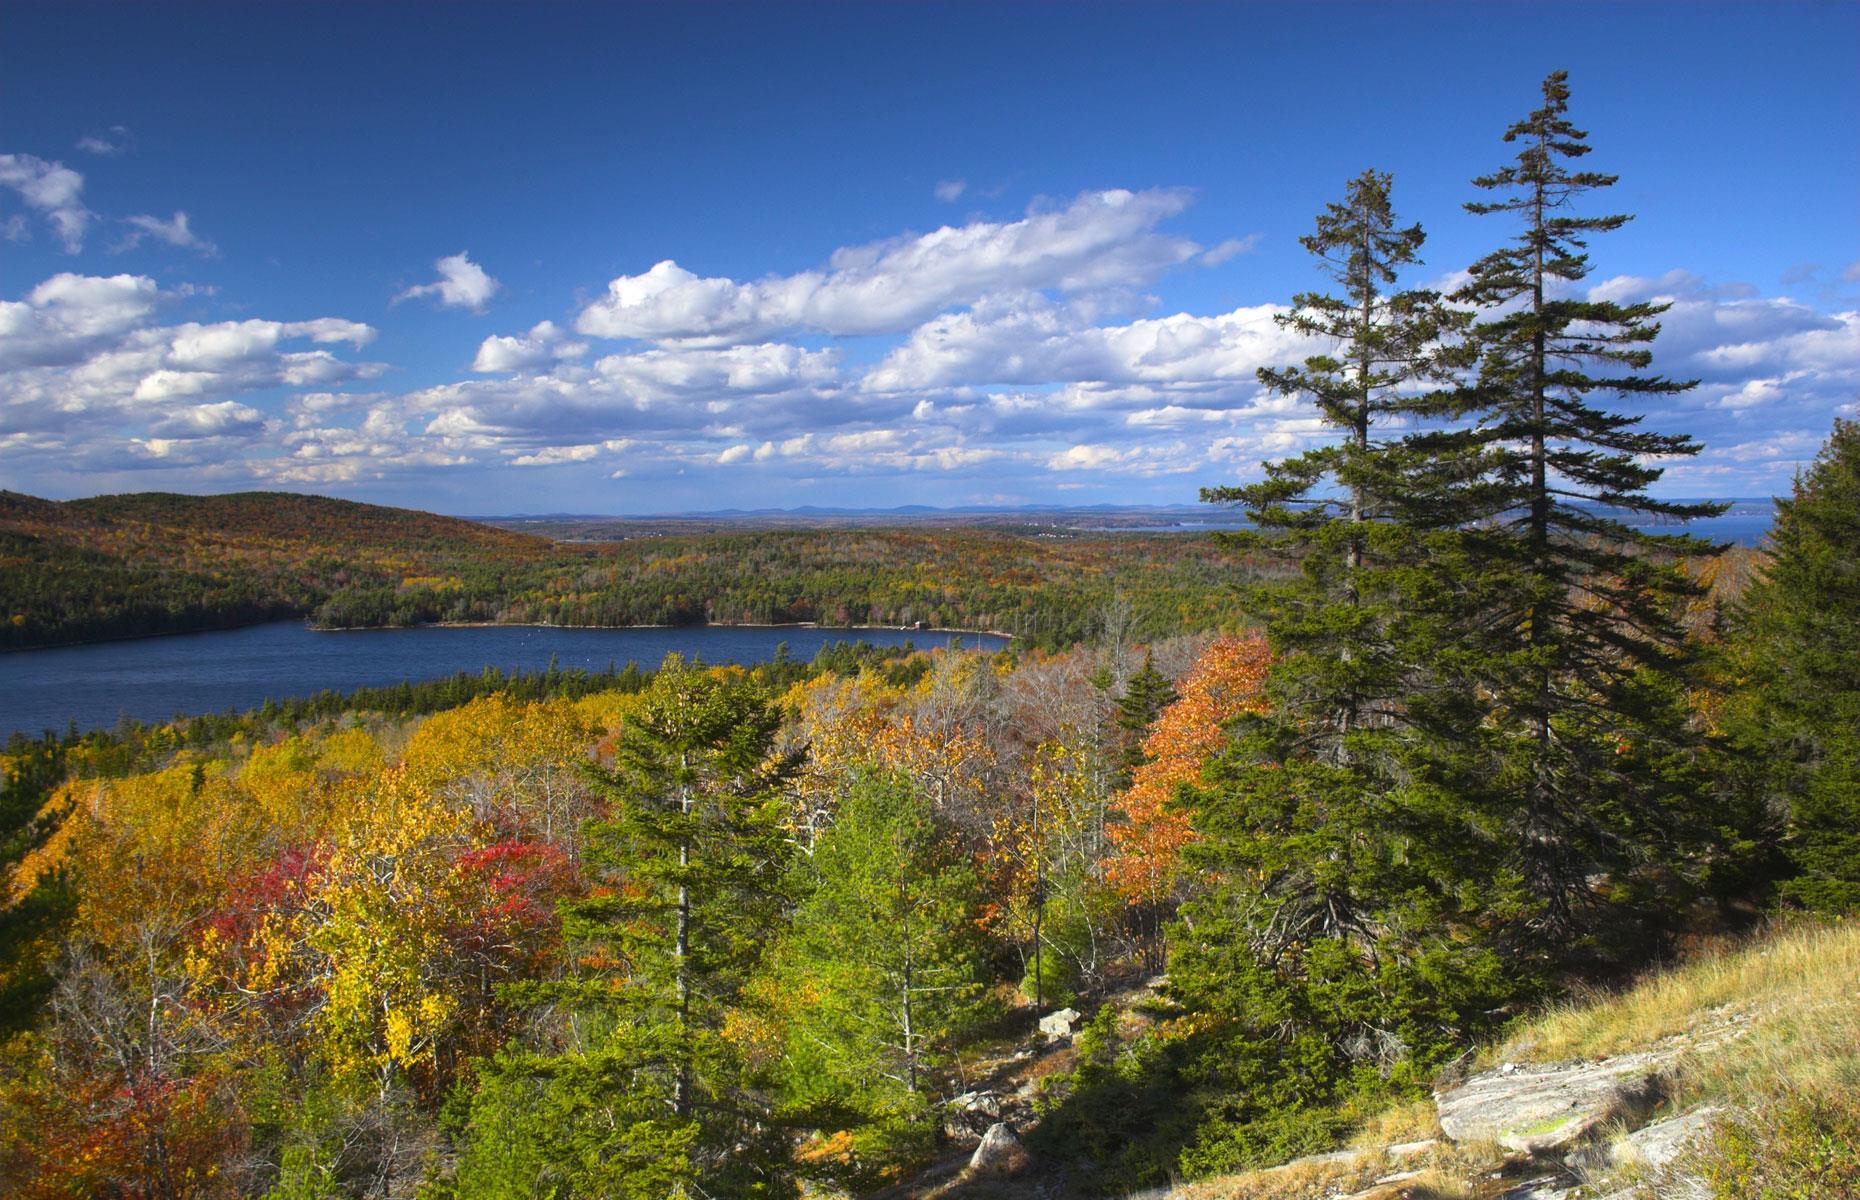 11. Pingree heirs: 830,000 acres